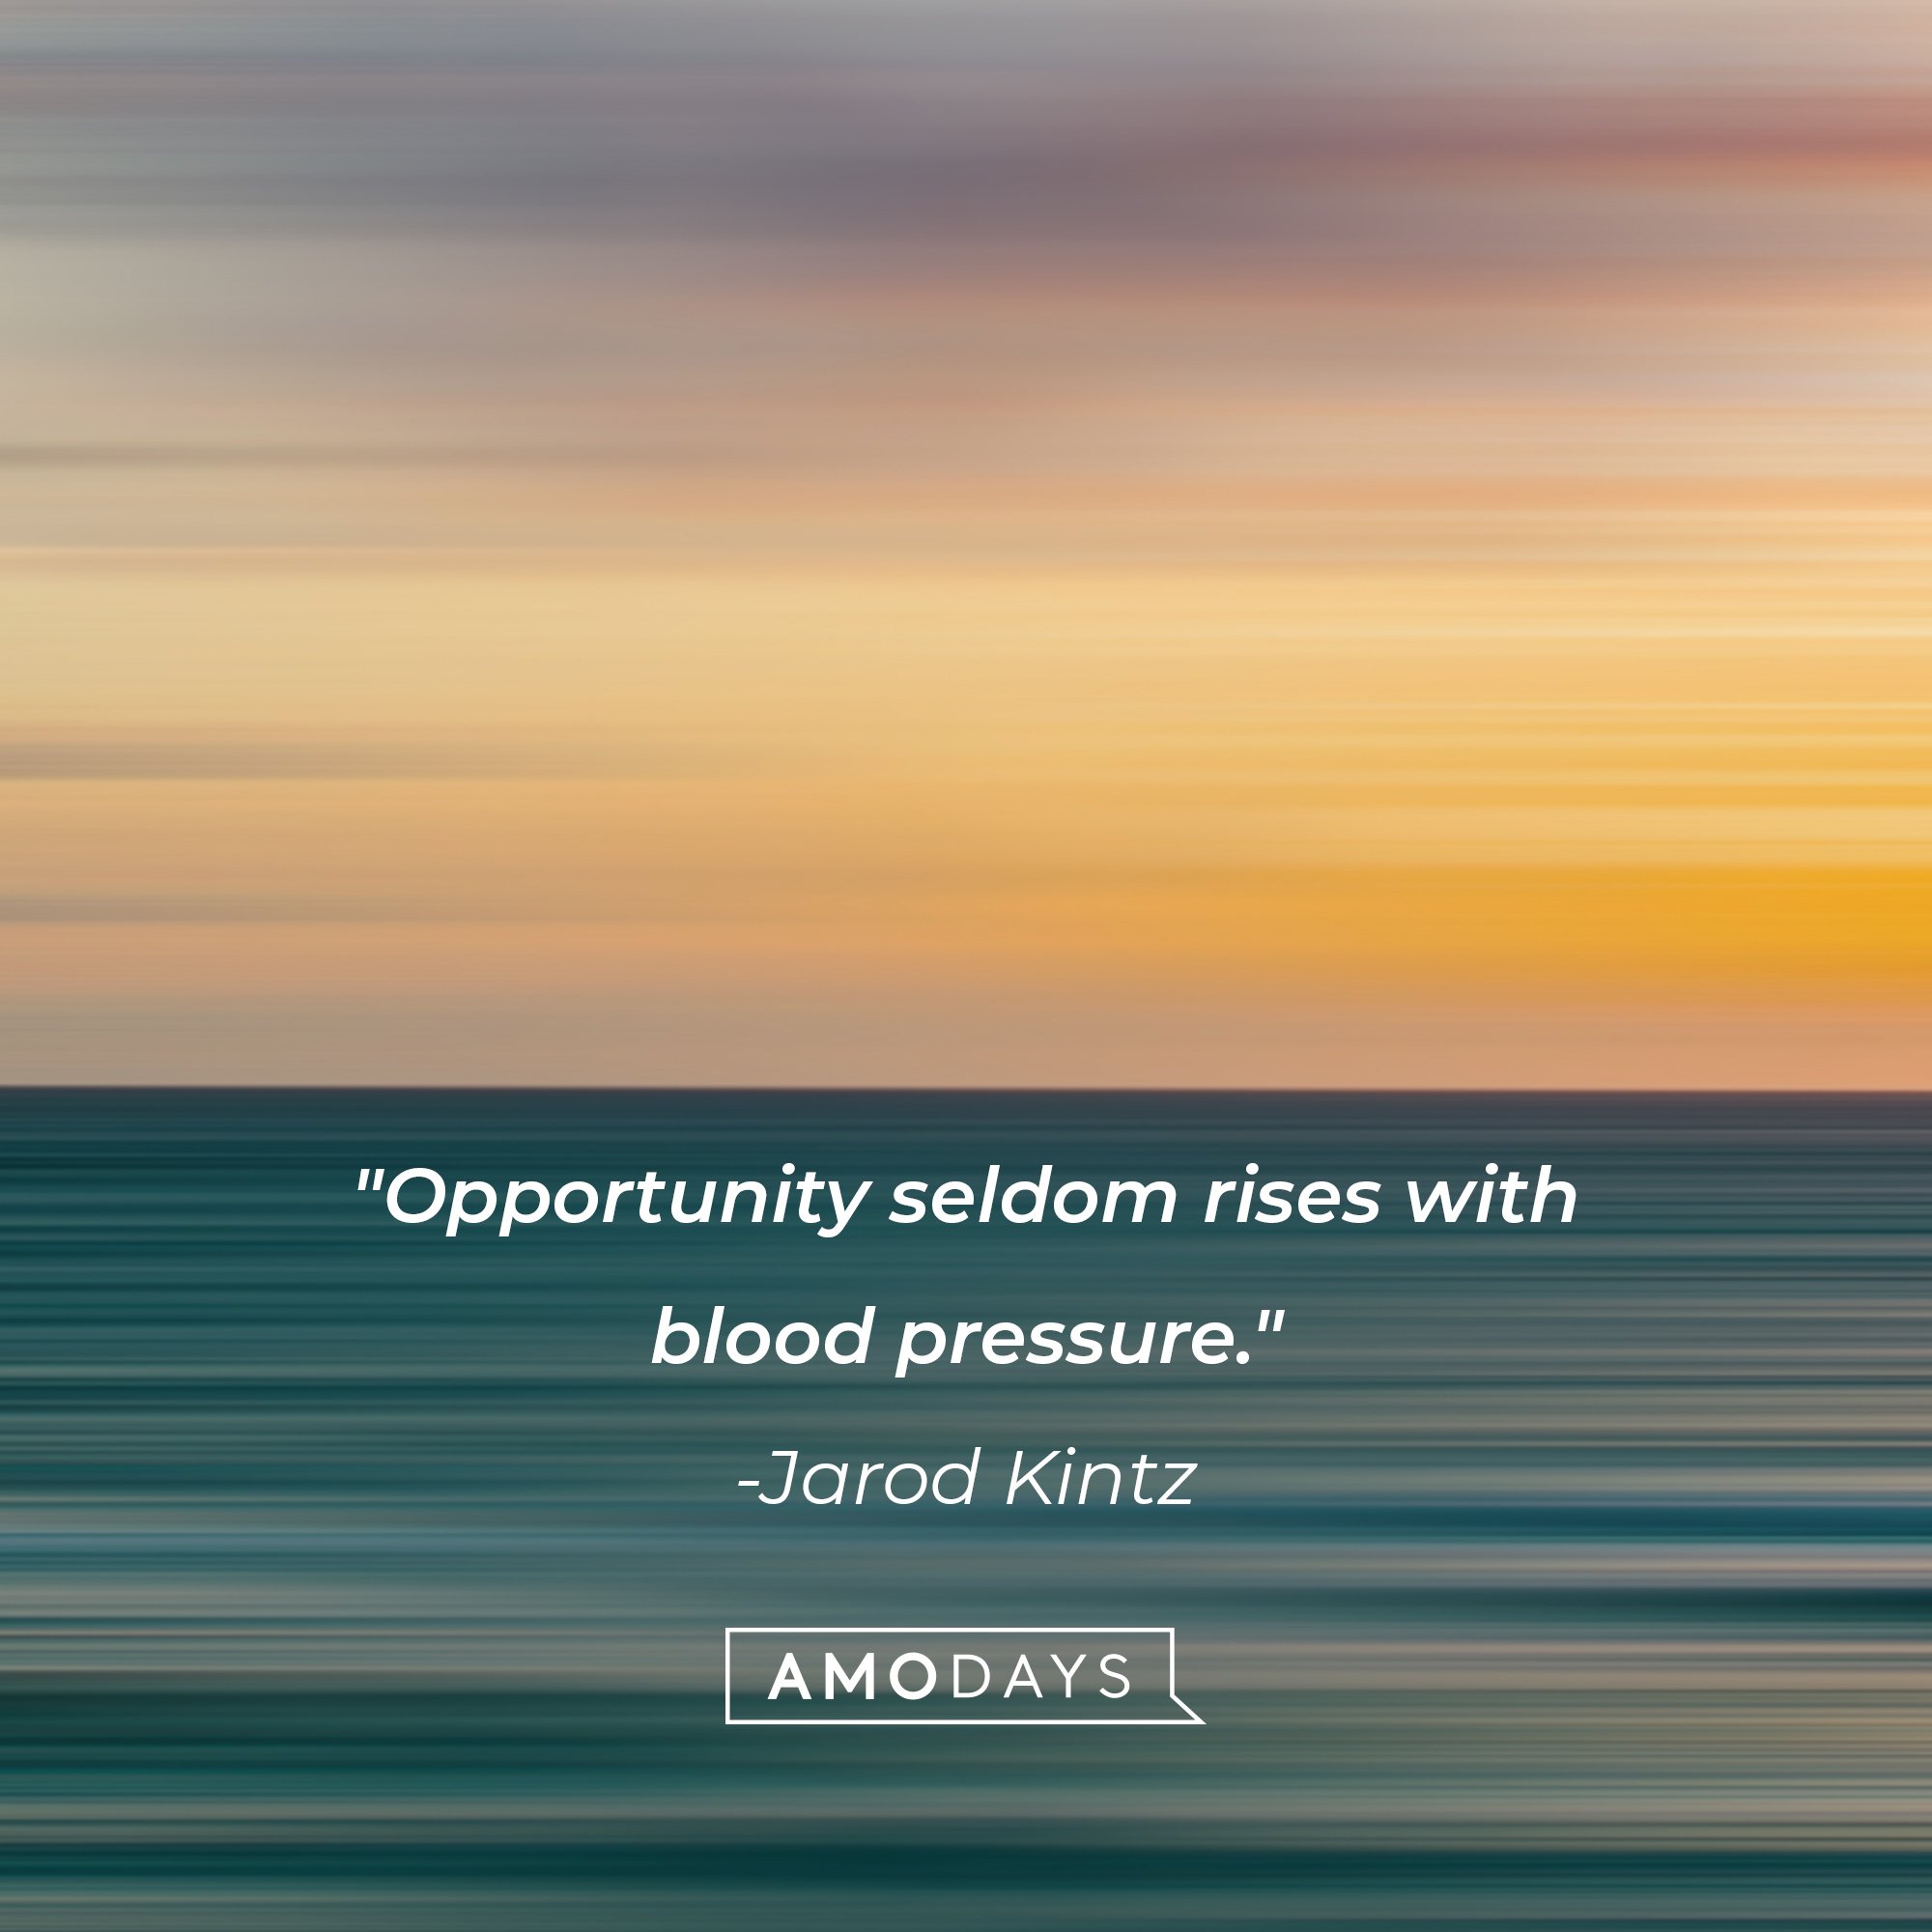 Prasad Mahes’ quote: "Opportunity seldom rises with blood pressure." | Image: AmoDays